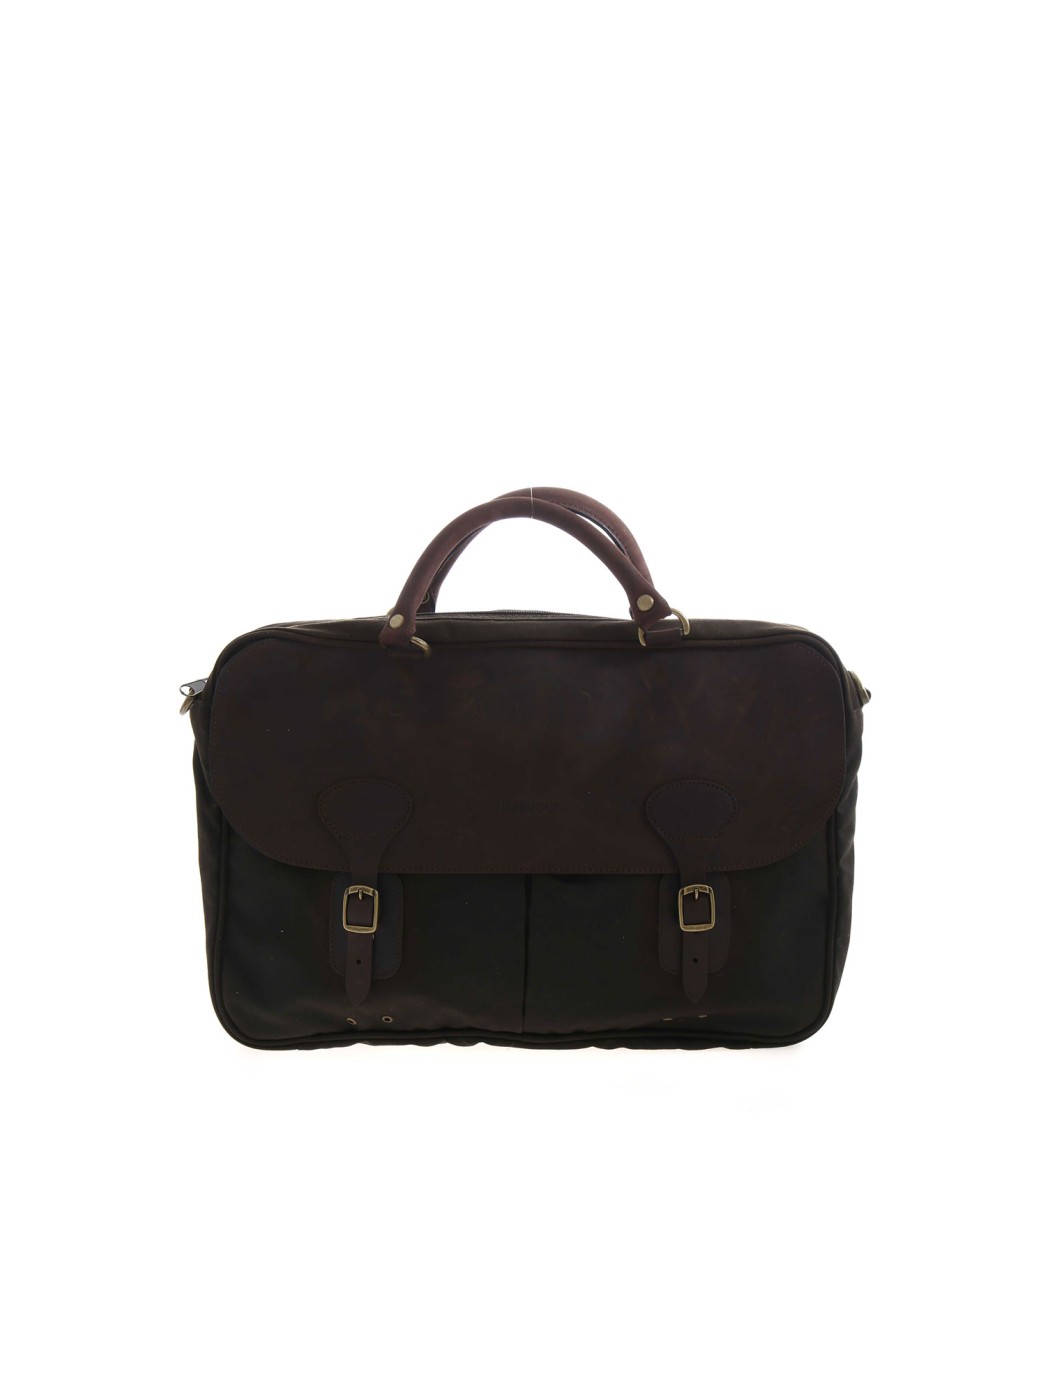 WAX LEATHER BRIEFCASE...